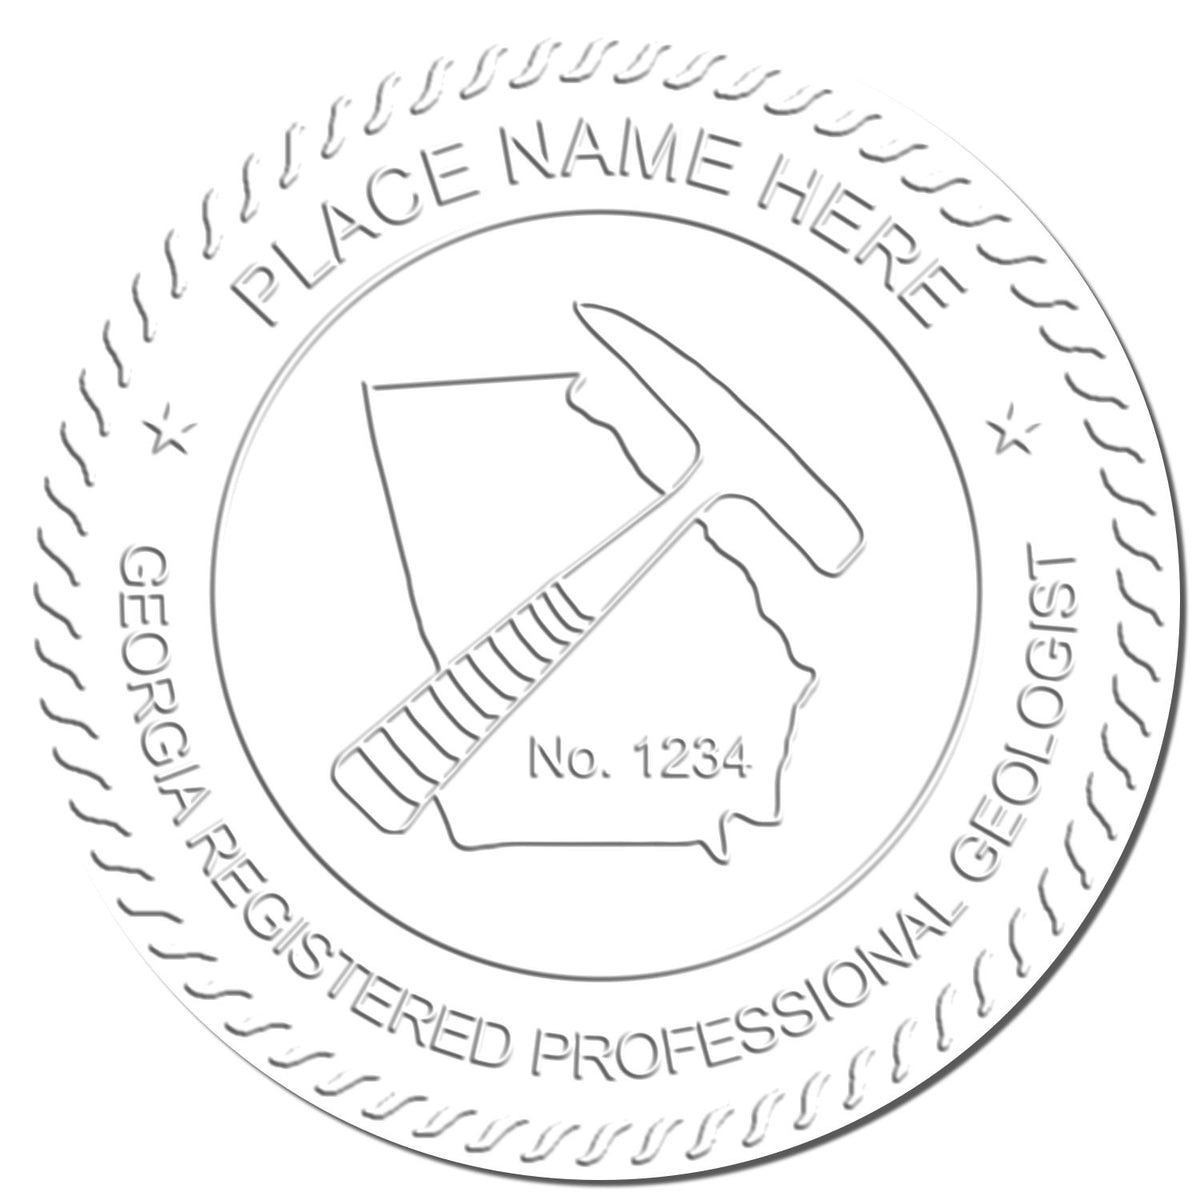 A photograph of the State of Georgia Extended Long Reach Geologist Seal stamp impression reveals a vivid, professional image of the on paper.